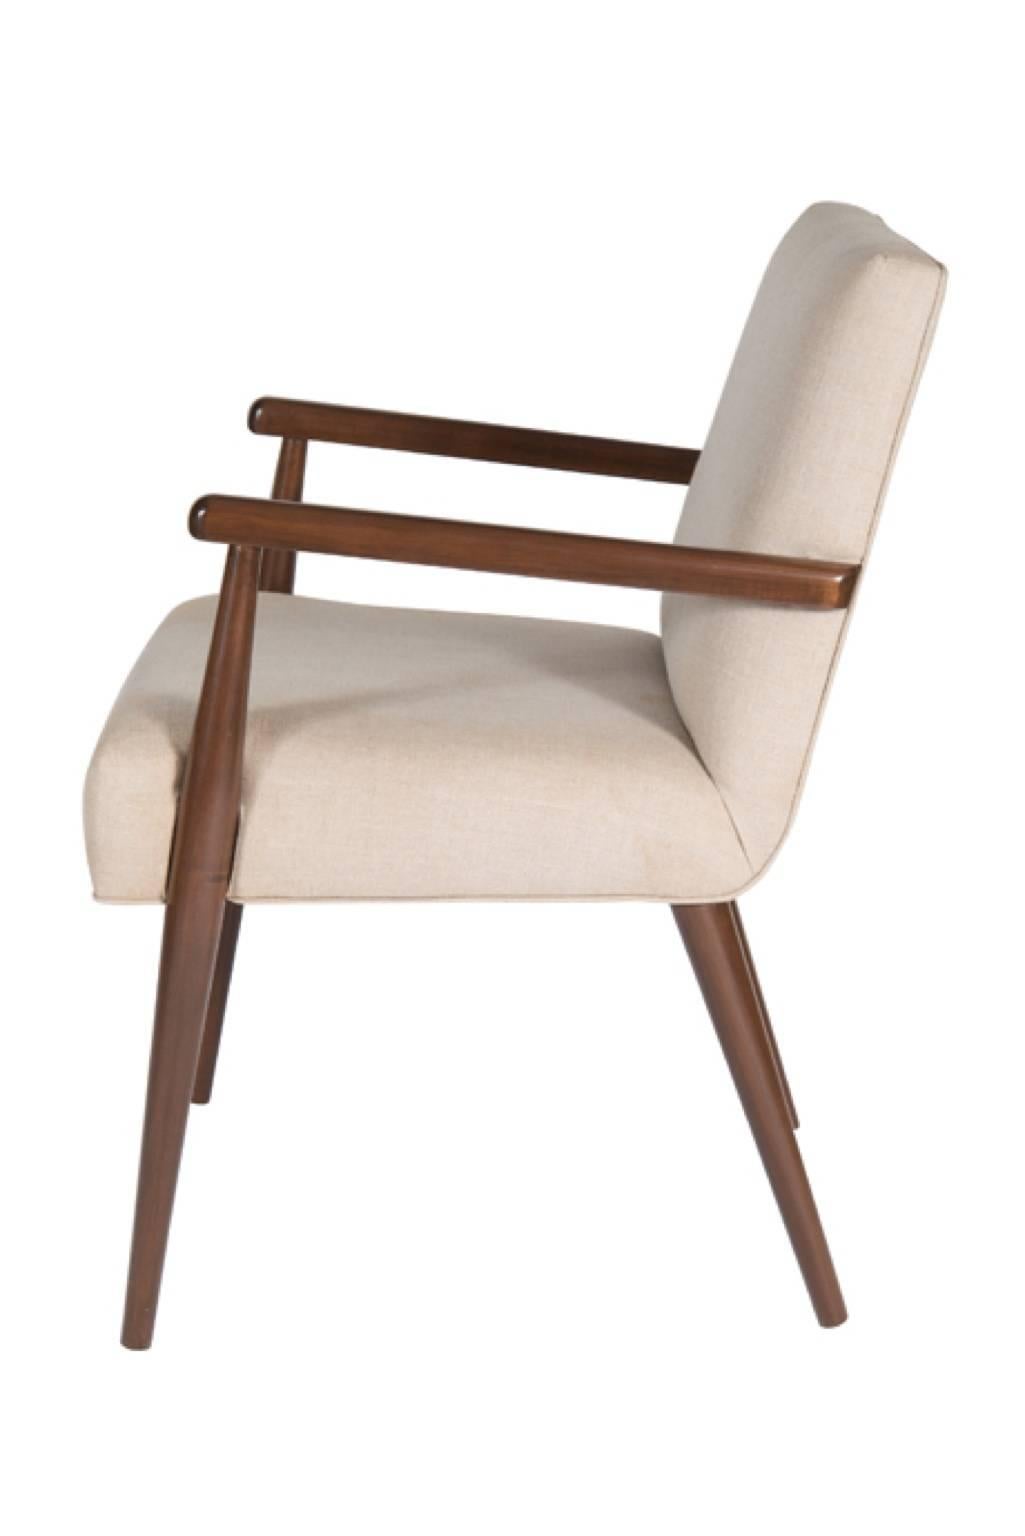 American Sheppard Dowel Leg Arm Dining Chair For Sale